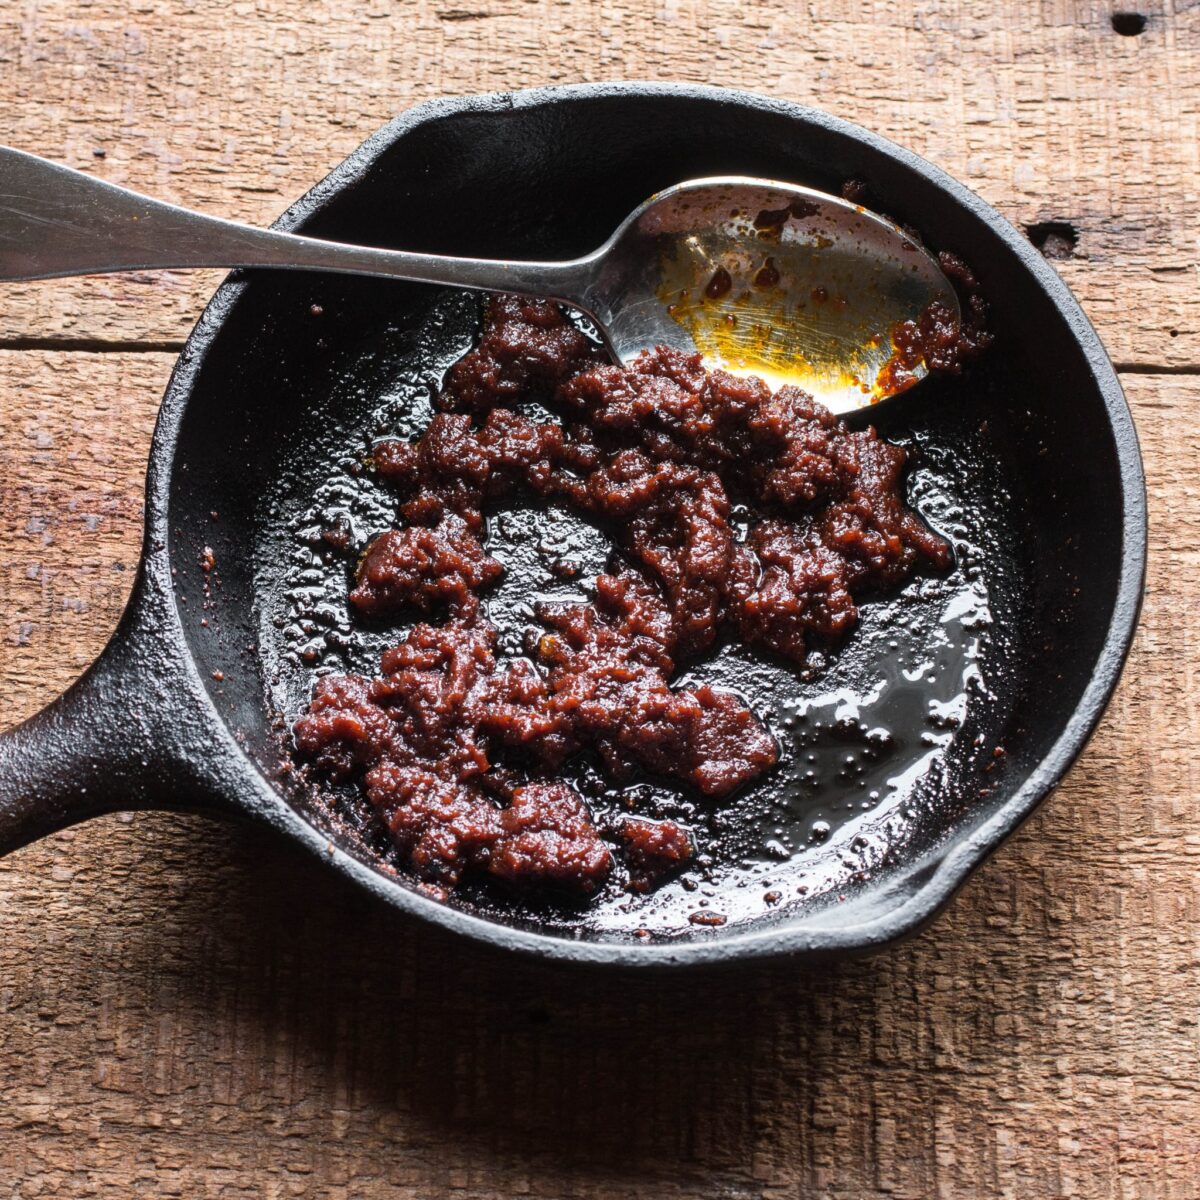 Cooking harissa paste in a small cast iron skillet.